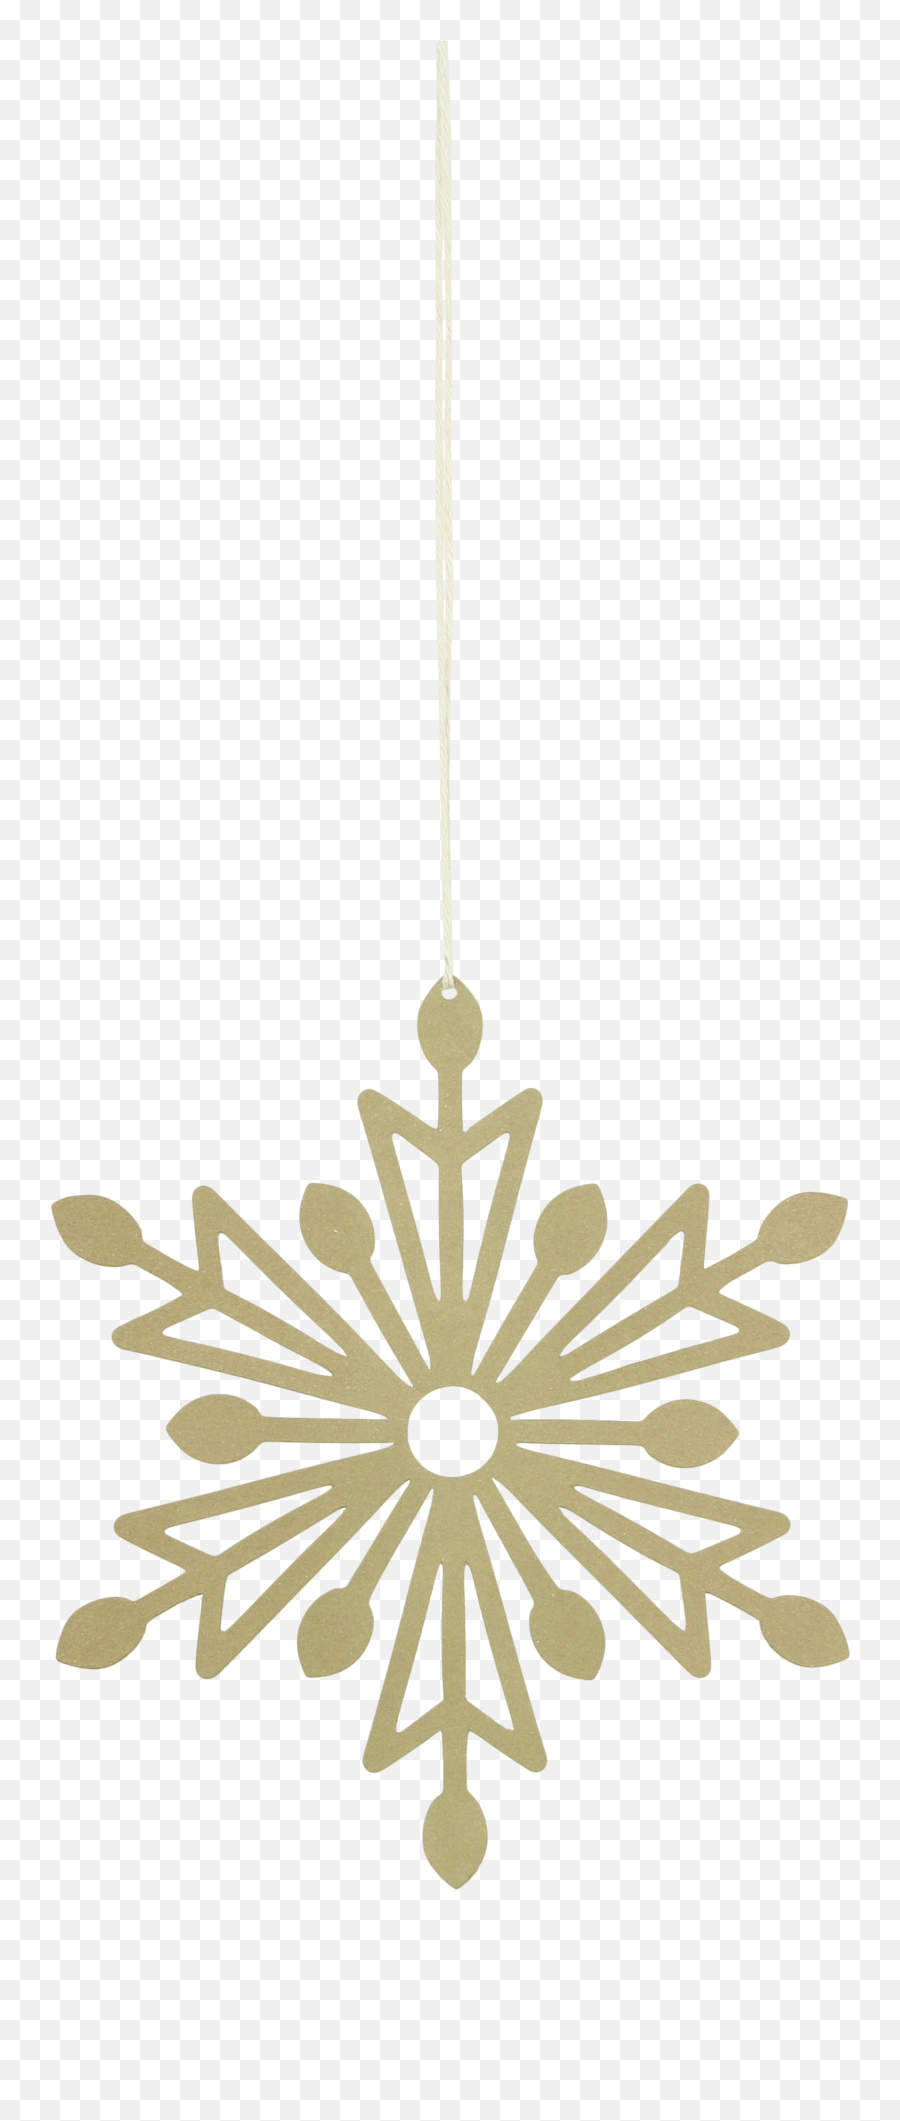 Download Traditional Christmas Snowflakes - Lamp Full Size Simple Snowflake Icon Png,Christmas Snowflakes Png